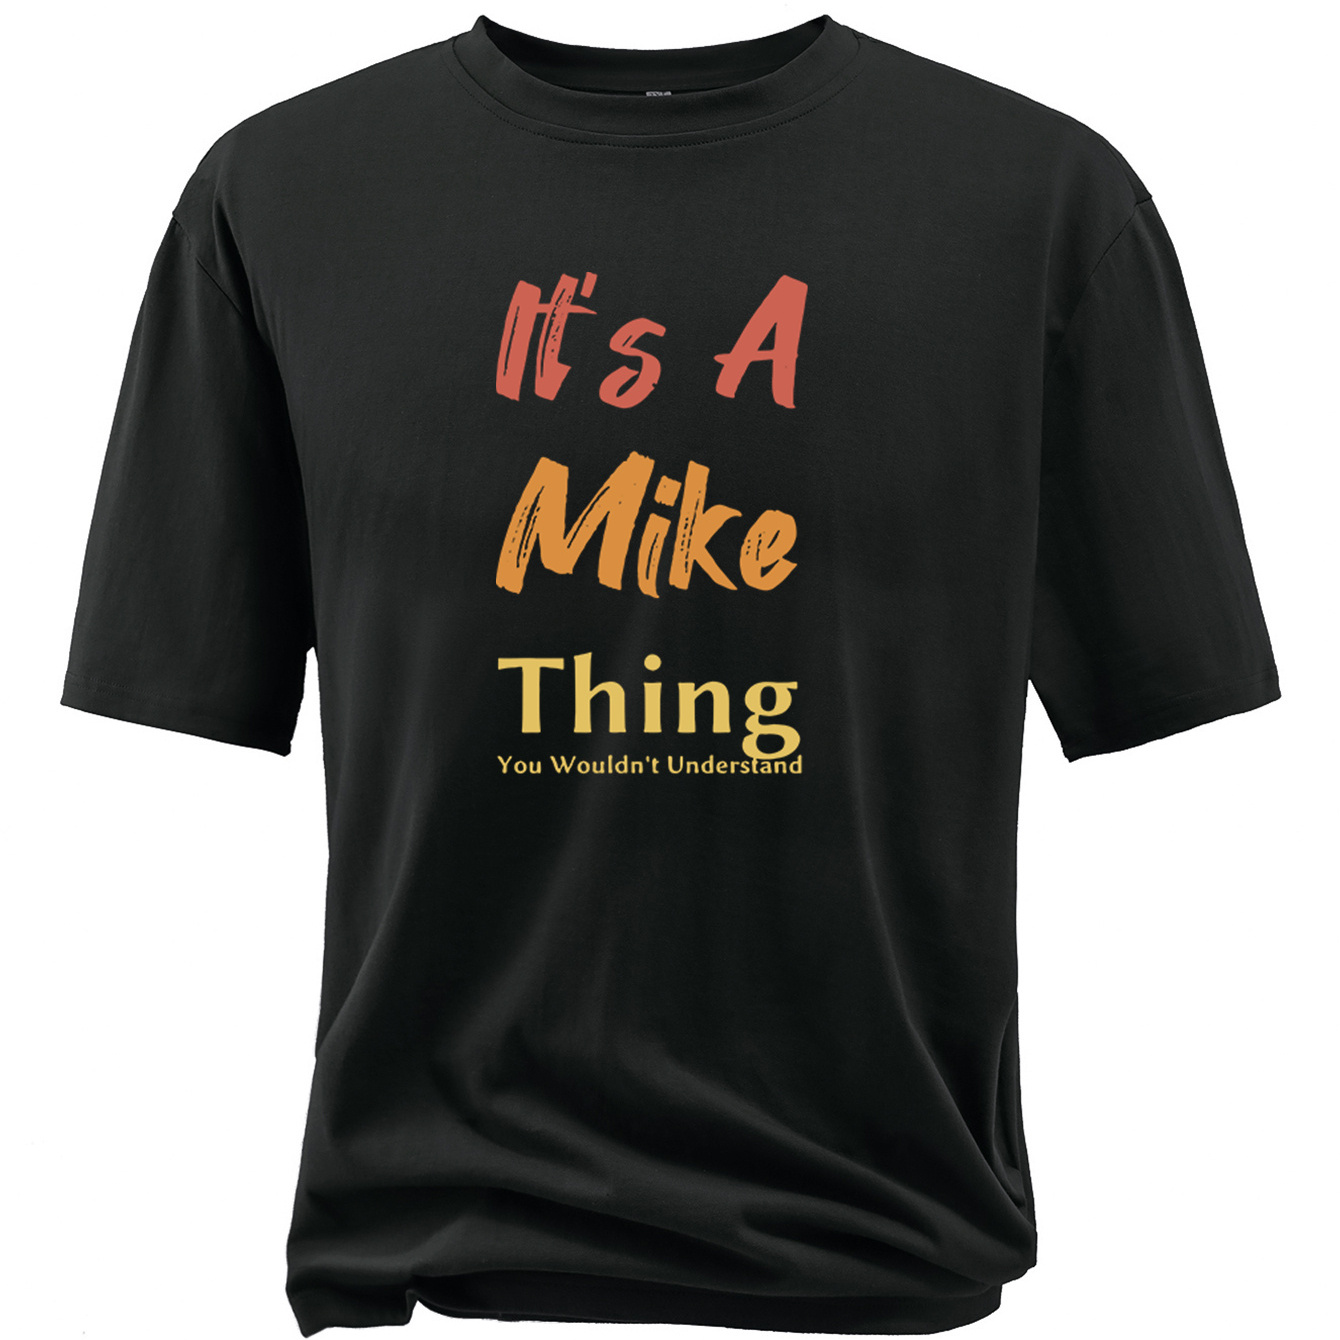 

Men's Plus Size Fancy Letter Mike Thing Print Crew Neck T-shirt, Casual Comfy Tee, Trendy Short Sleeve Top For Summer Daily Wear